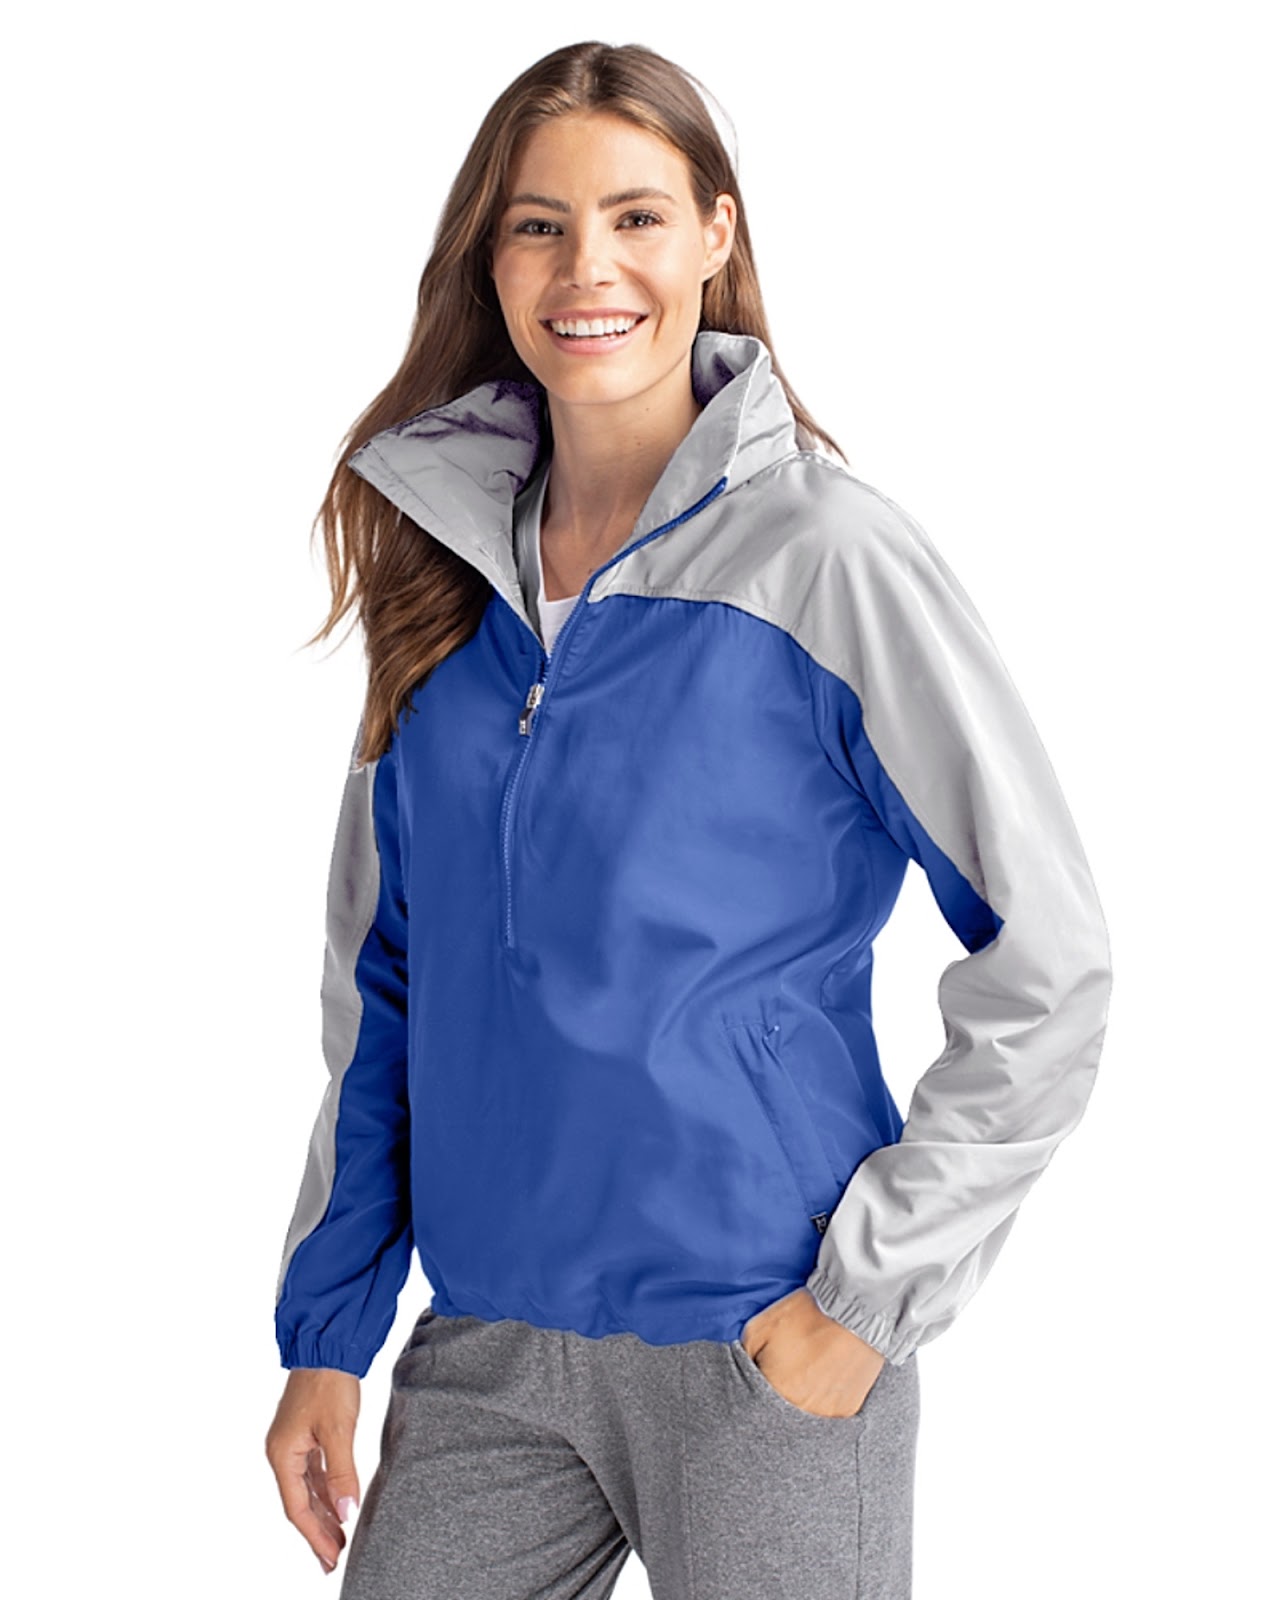 Woman wearing Cutter & Buck Charter Eco Recycled Womens Anorak Jacket in Tour Blue/Polished or Blue and Grey 